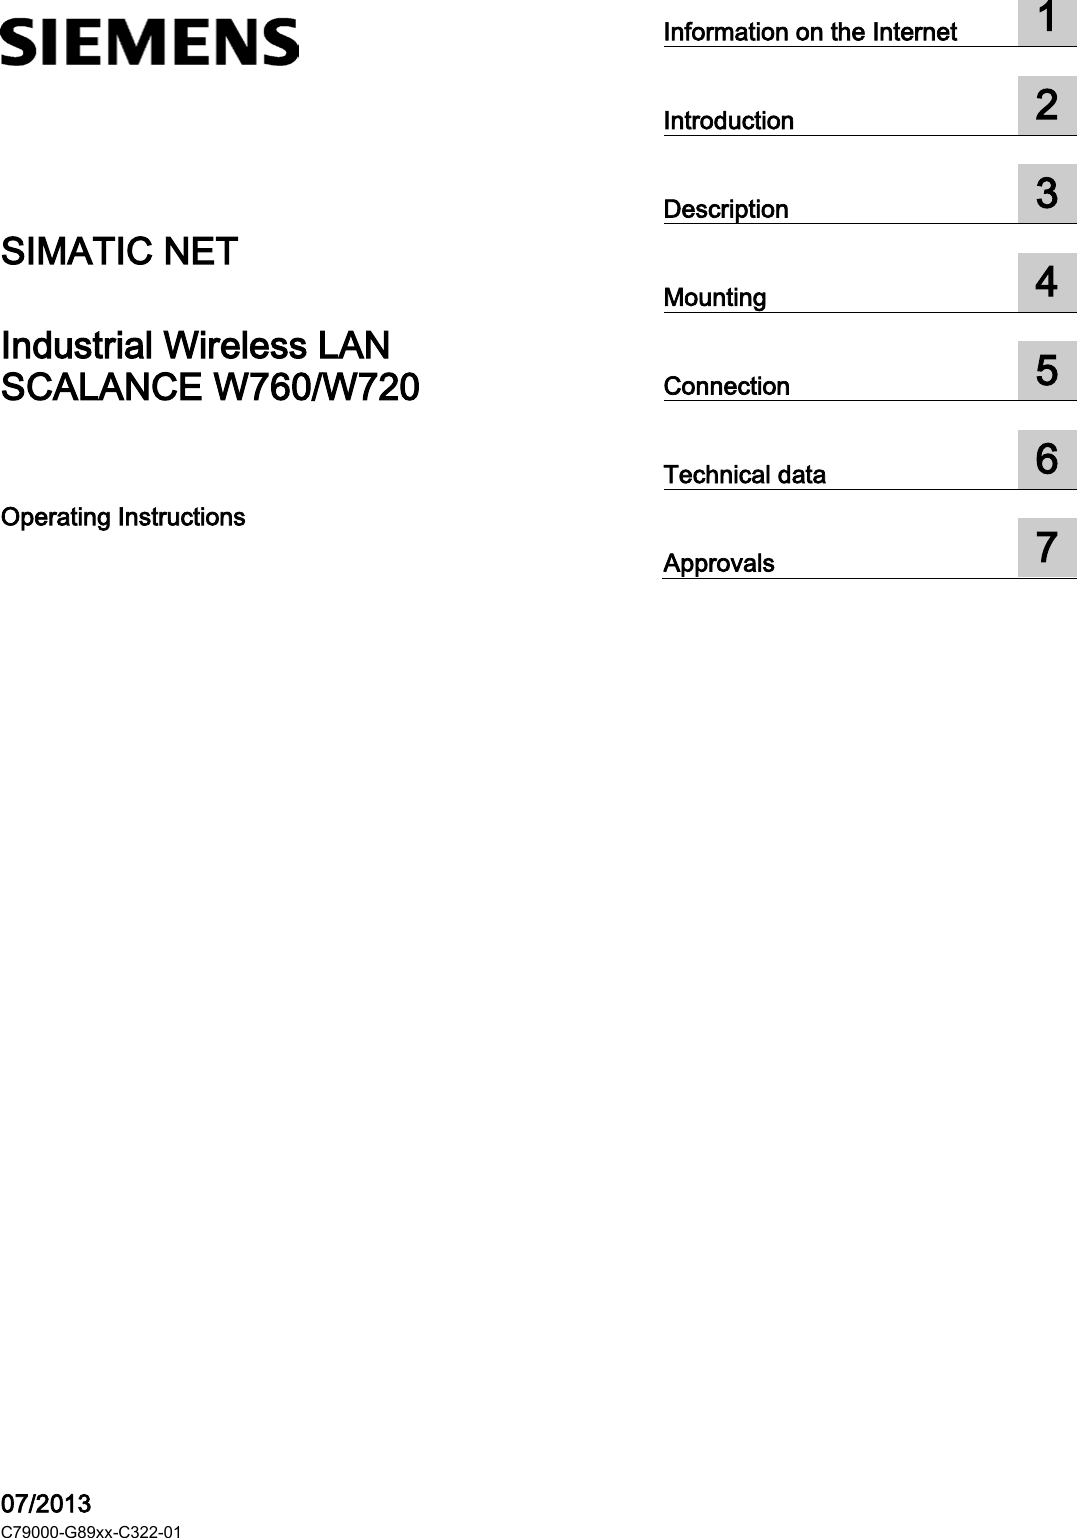 SCALANCE W760/W720  ___________________ ___________________ ___________________ ___________________ ___________________ ___________________ ___________________  SIMATIC NET Industrial Wireless LAN SCALANCE W760/W720 Operating Instructions    07/2013 C79000-G89xx-C322-01 Information on the Internet  1  Introduction  2  Description  3  Mounting  4  Connection  5  Technical data  6  Approvals  7 